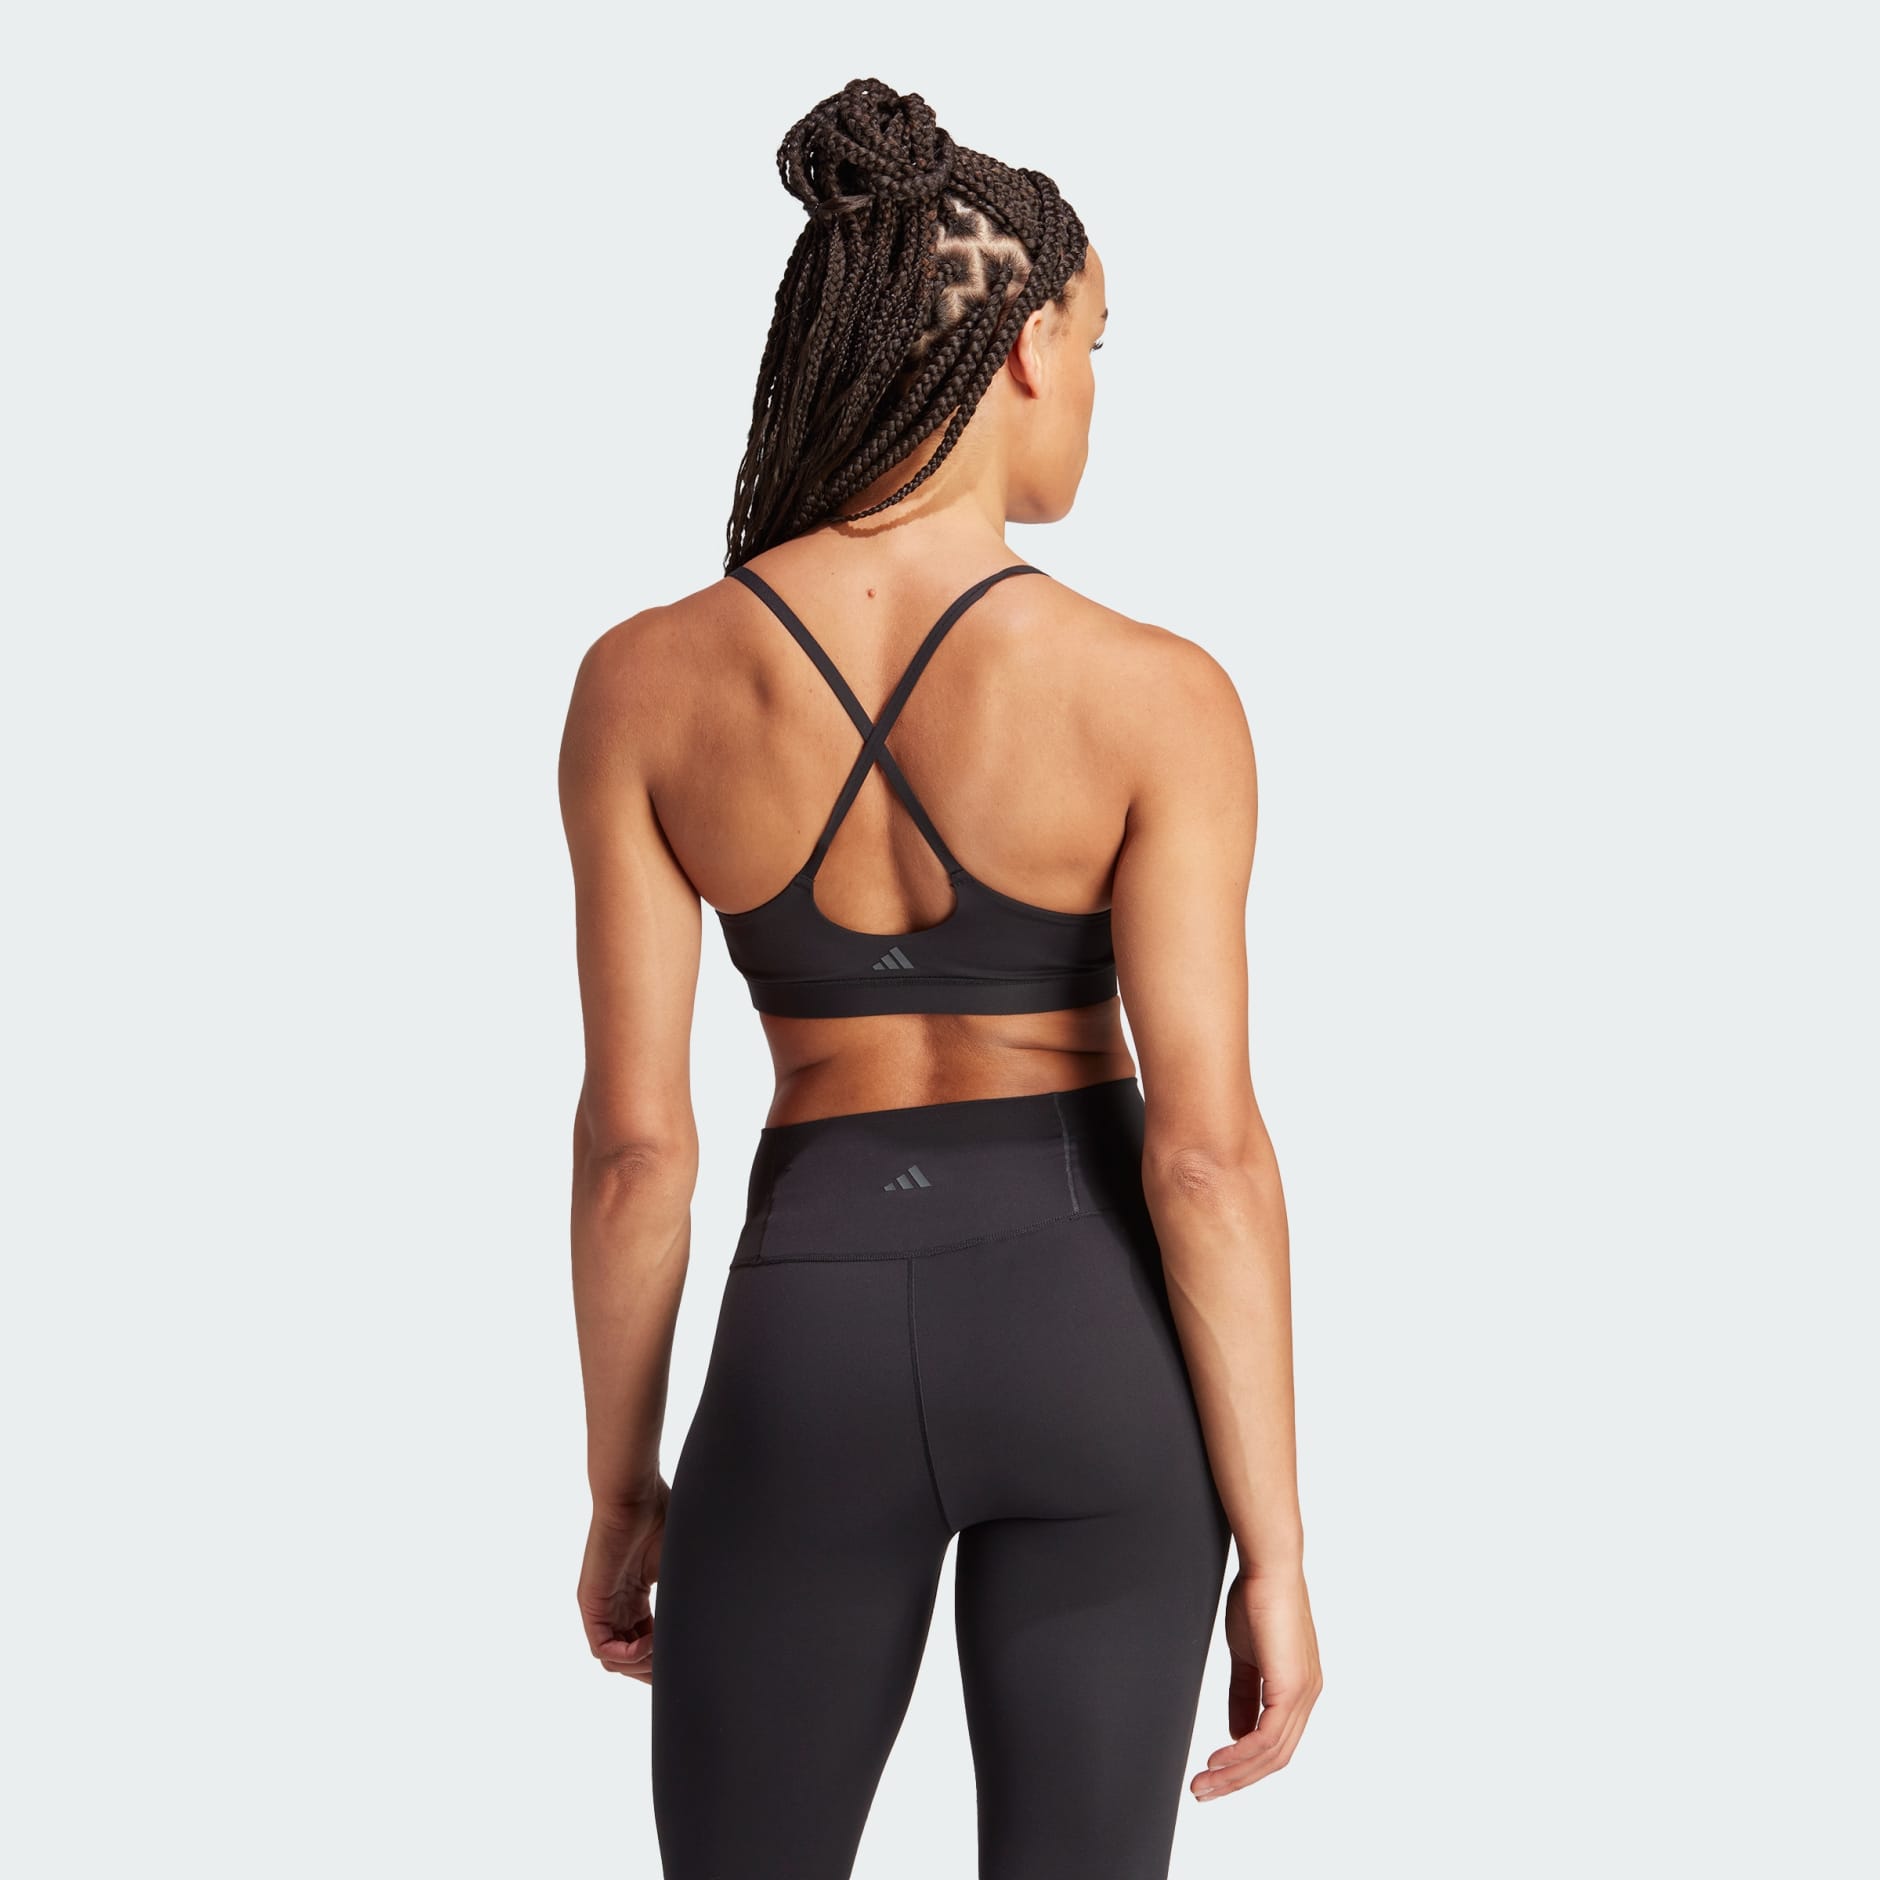 Black Sports Bralette for yoga with cross back straps – The Asanas®